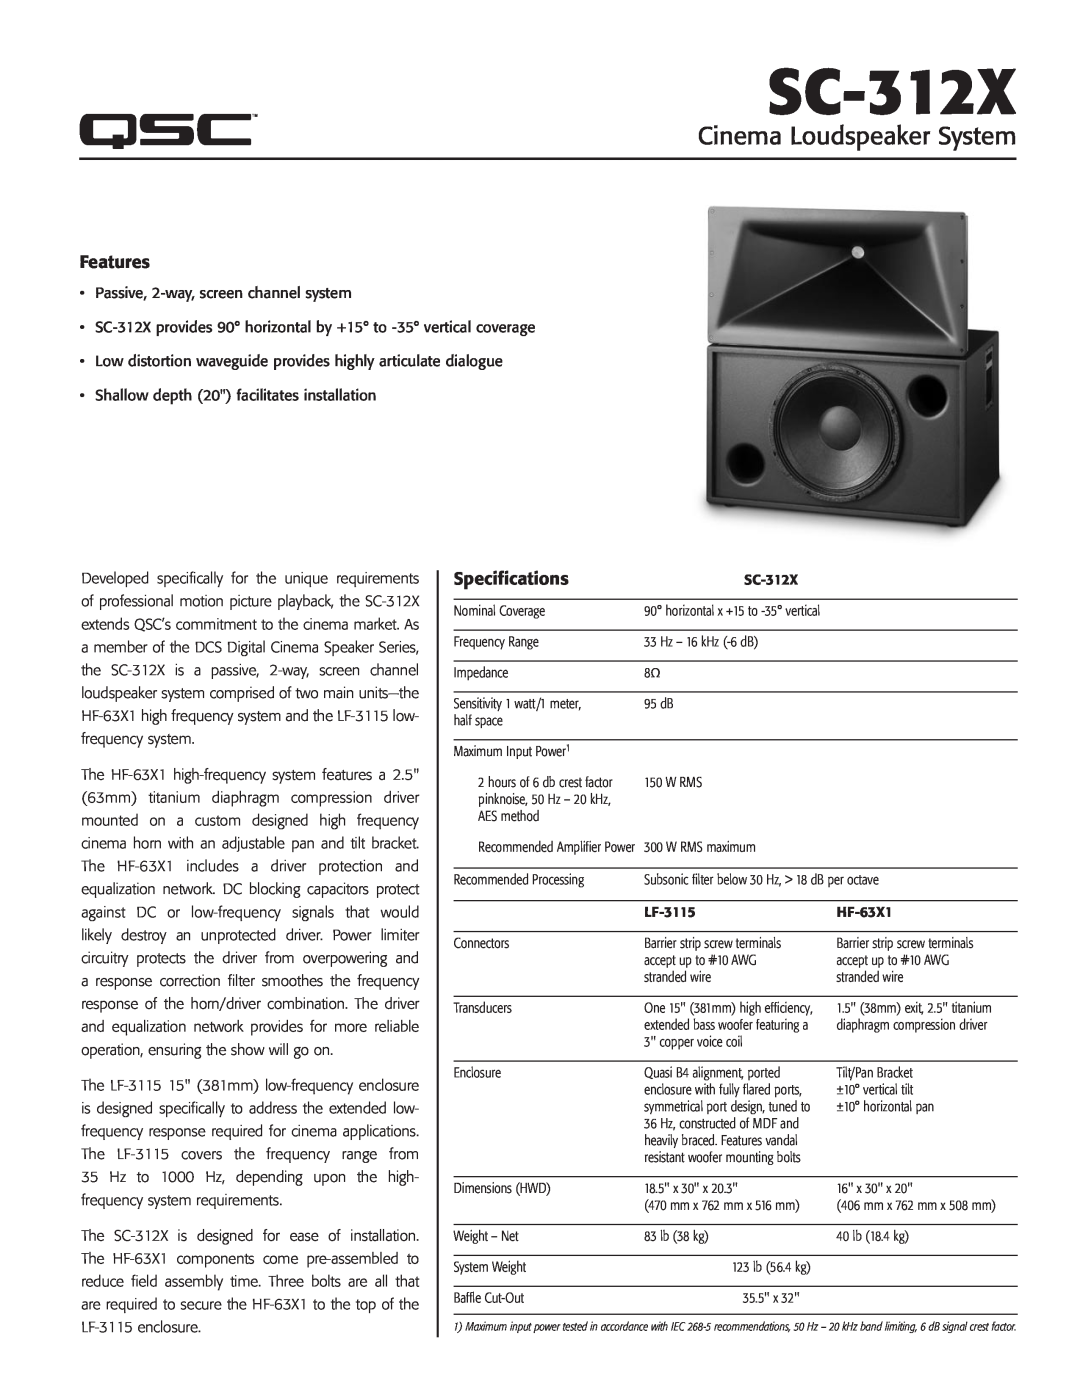 QSC Audio HF-63X1, LF-3115 specifications Features, Specifications, SC-312X, Cinema Loudspeaker System 